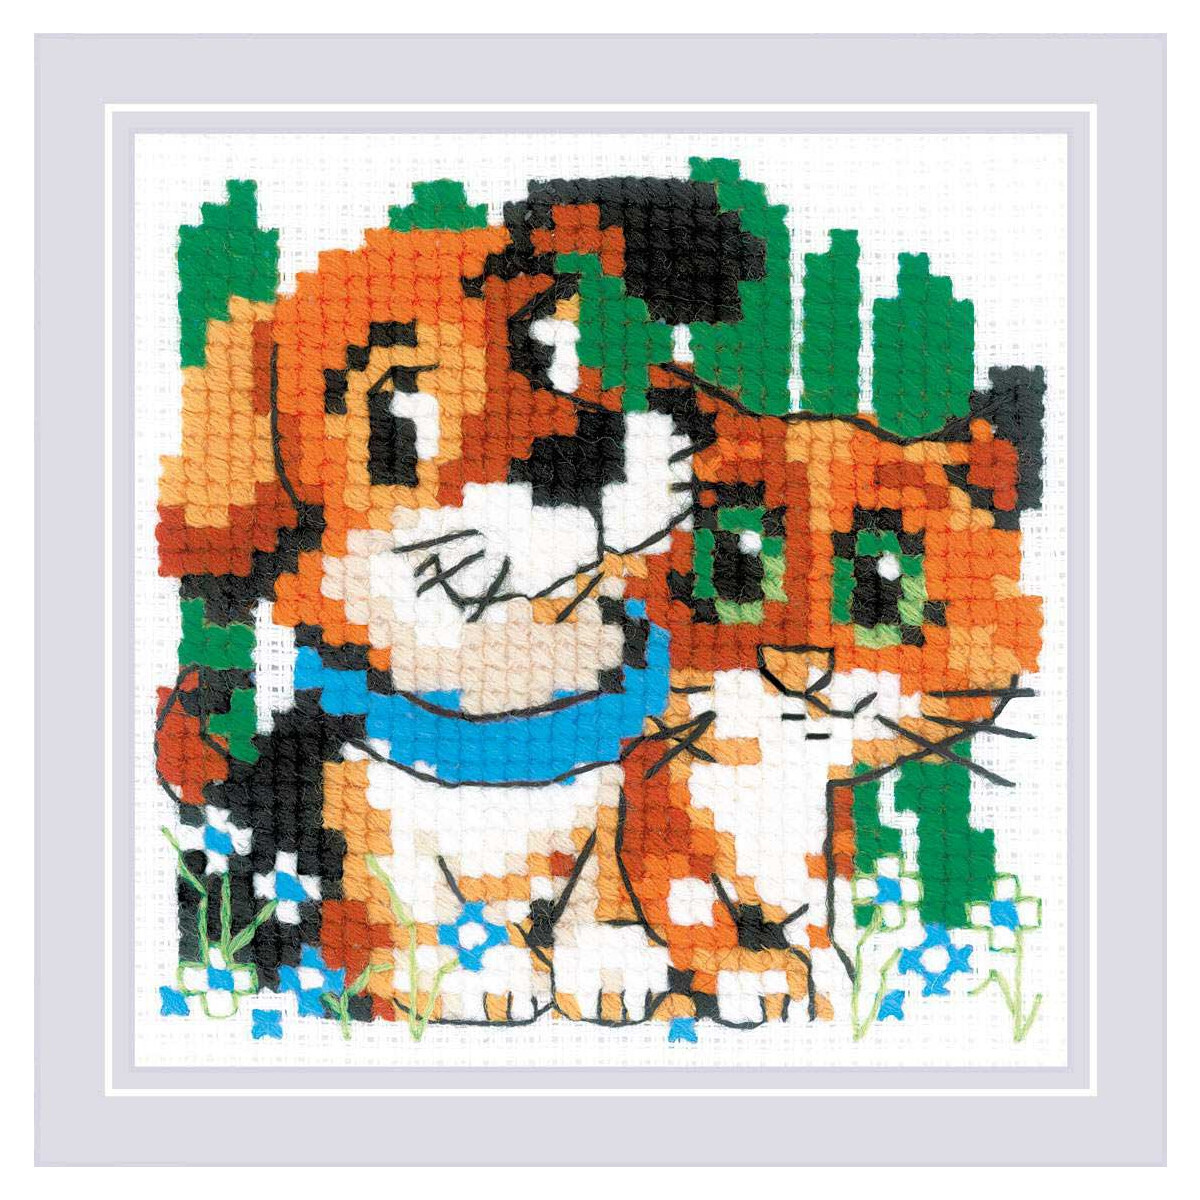 Riolis counted cross stitch kit "Stick with...